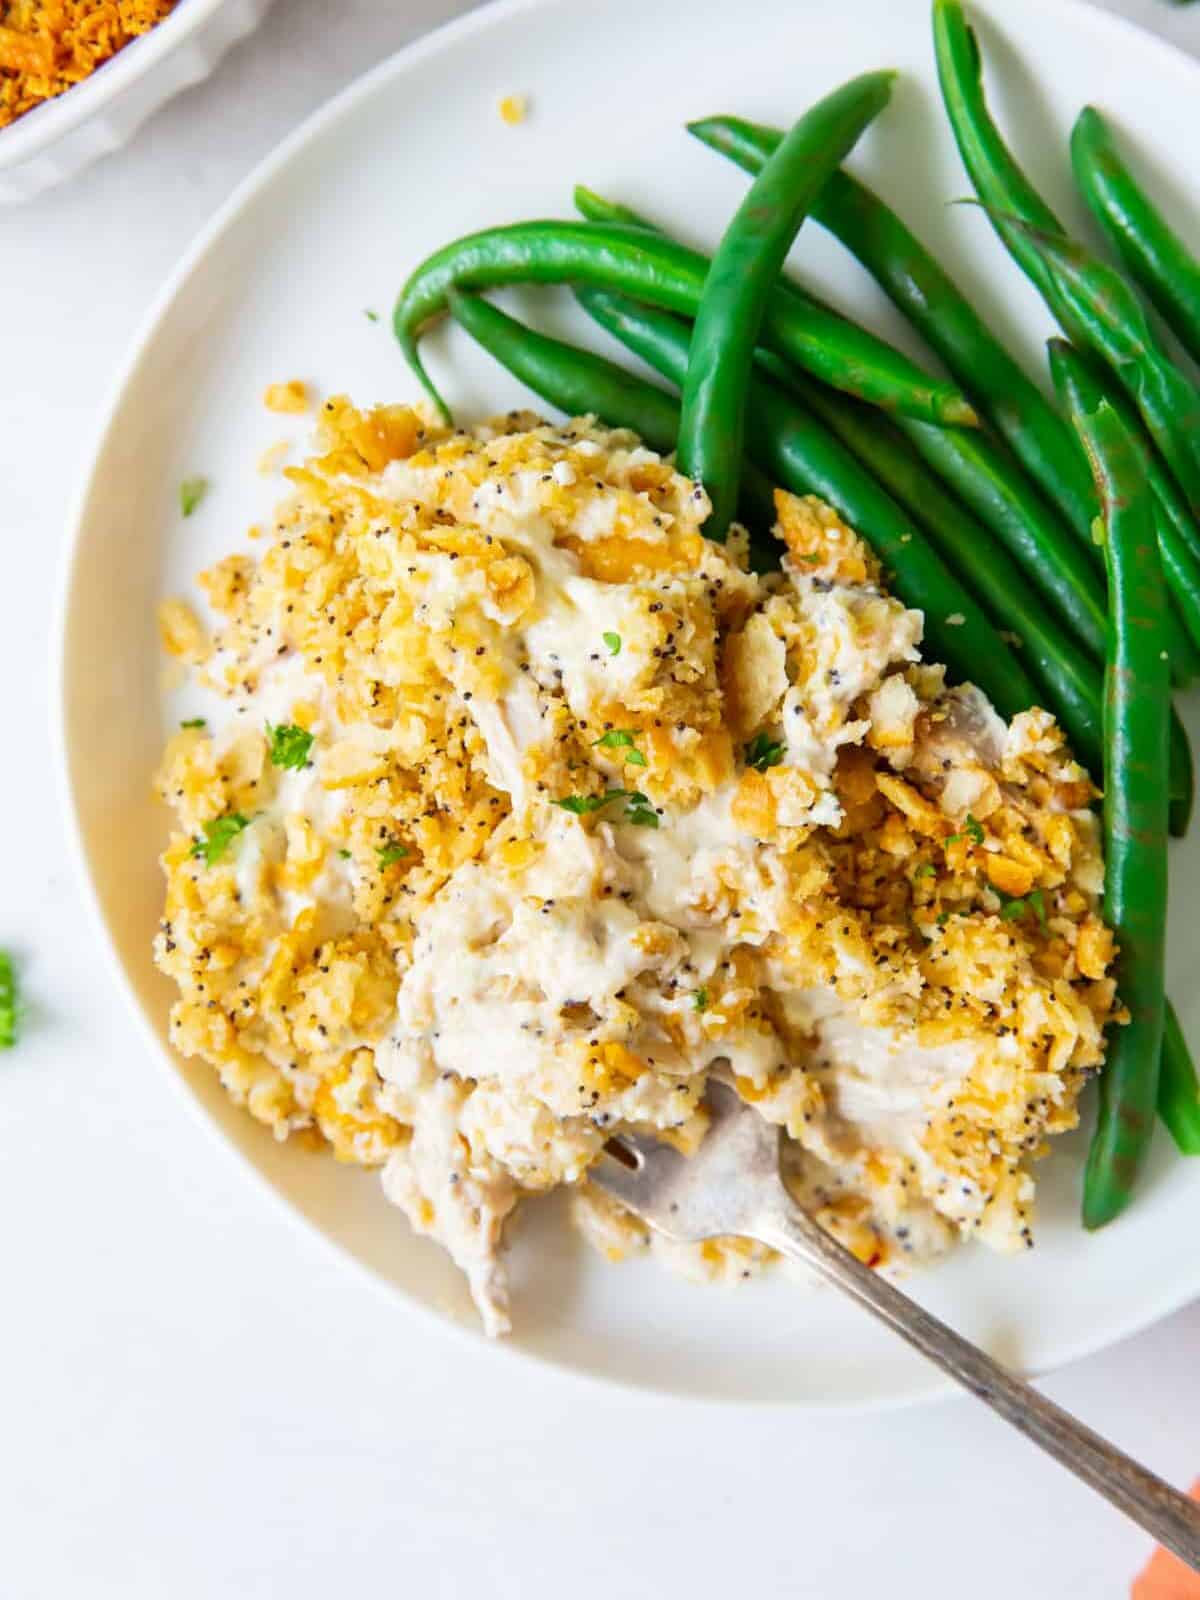 poppyseed chicken casserole on a plate with green beans